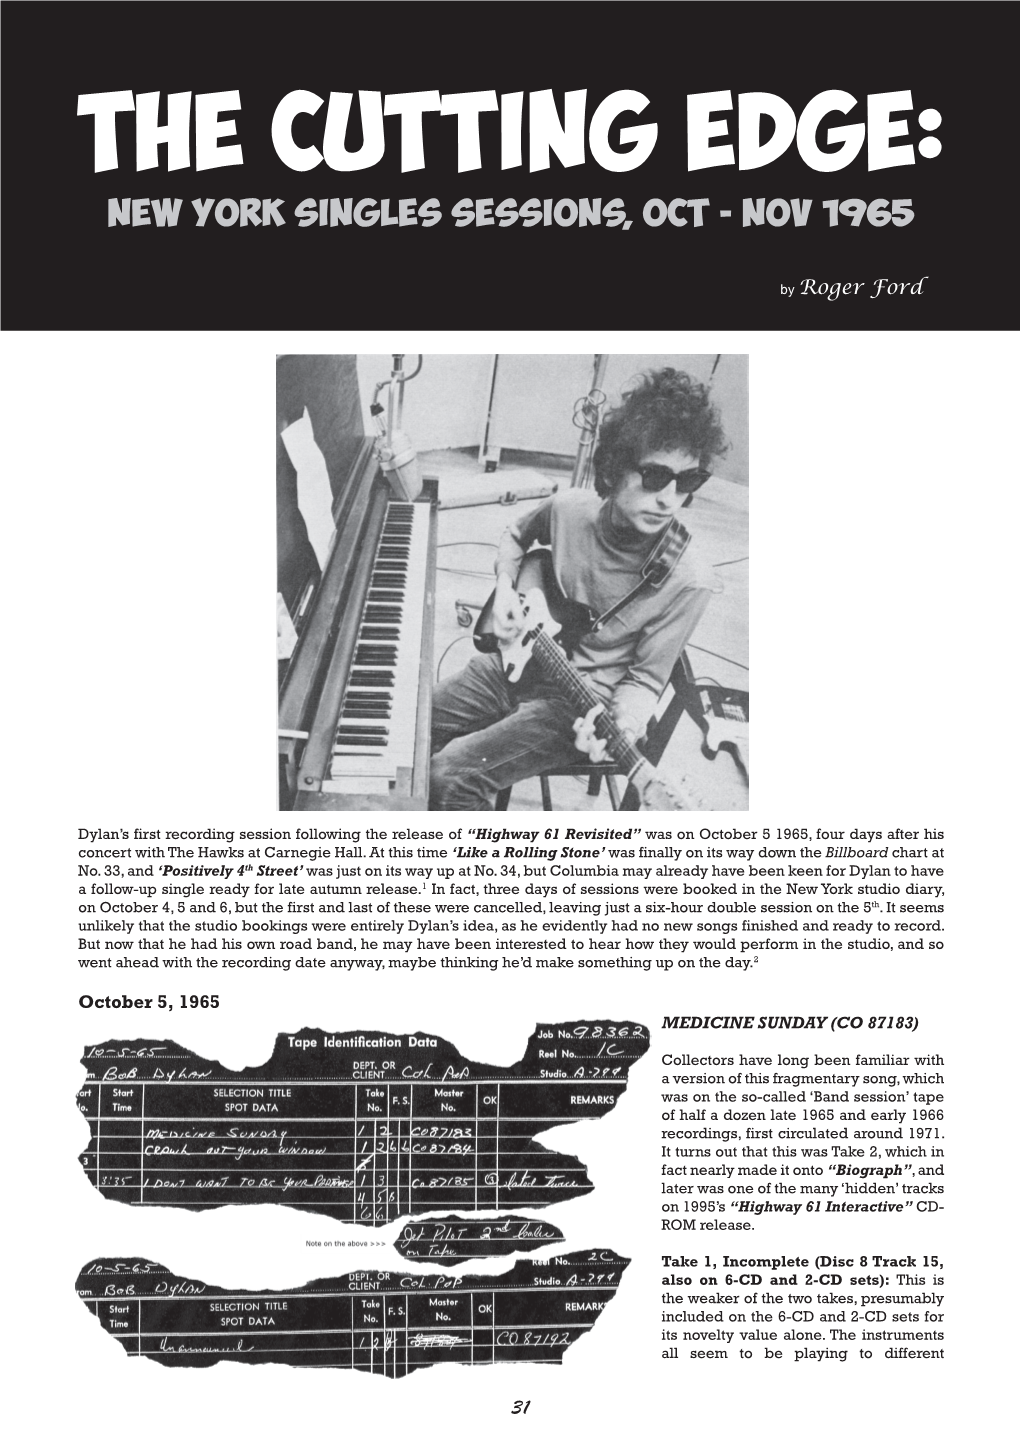 The Cutting Edge: New York Singles Sessions, Oct - Nov 1965